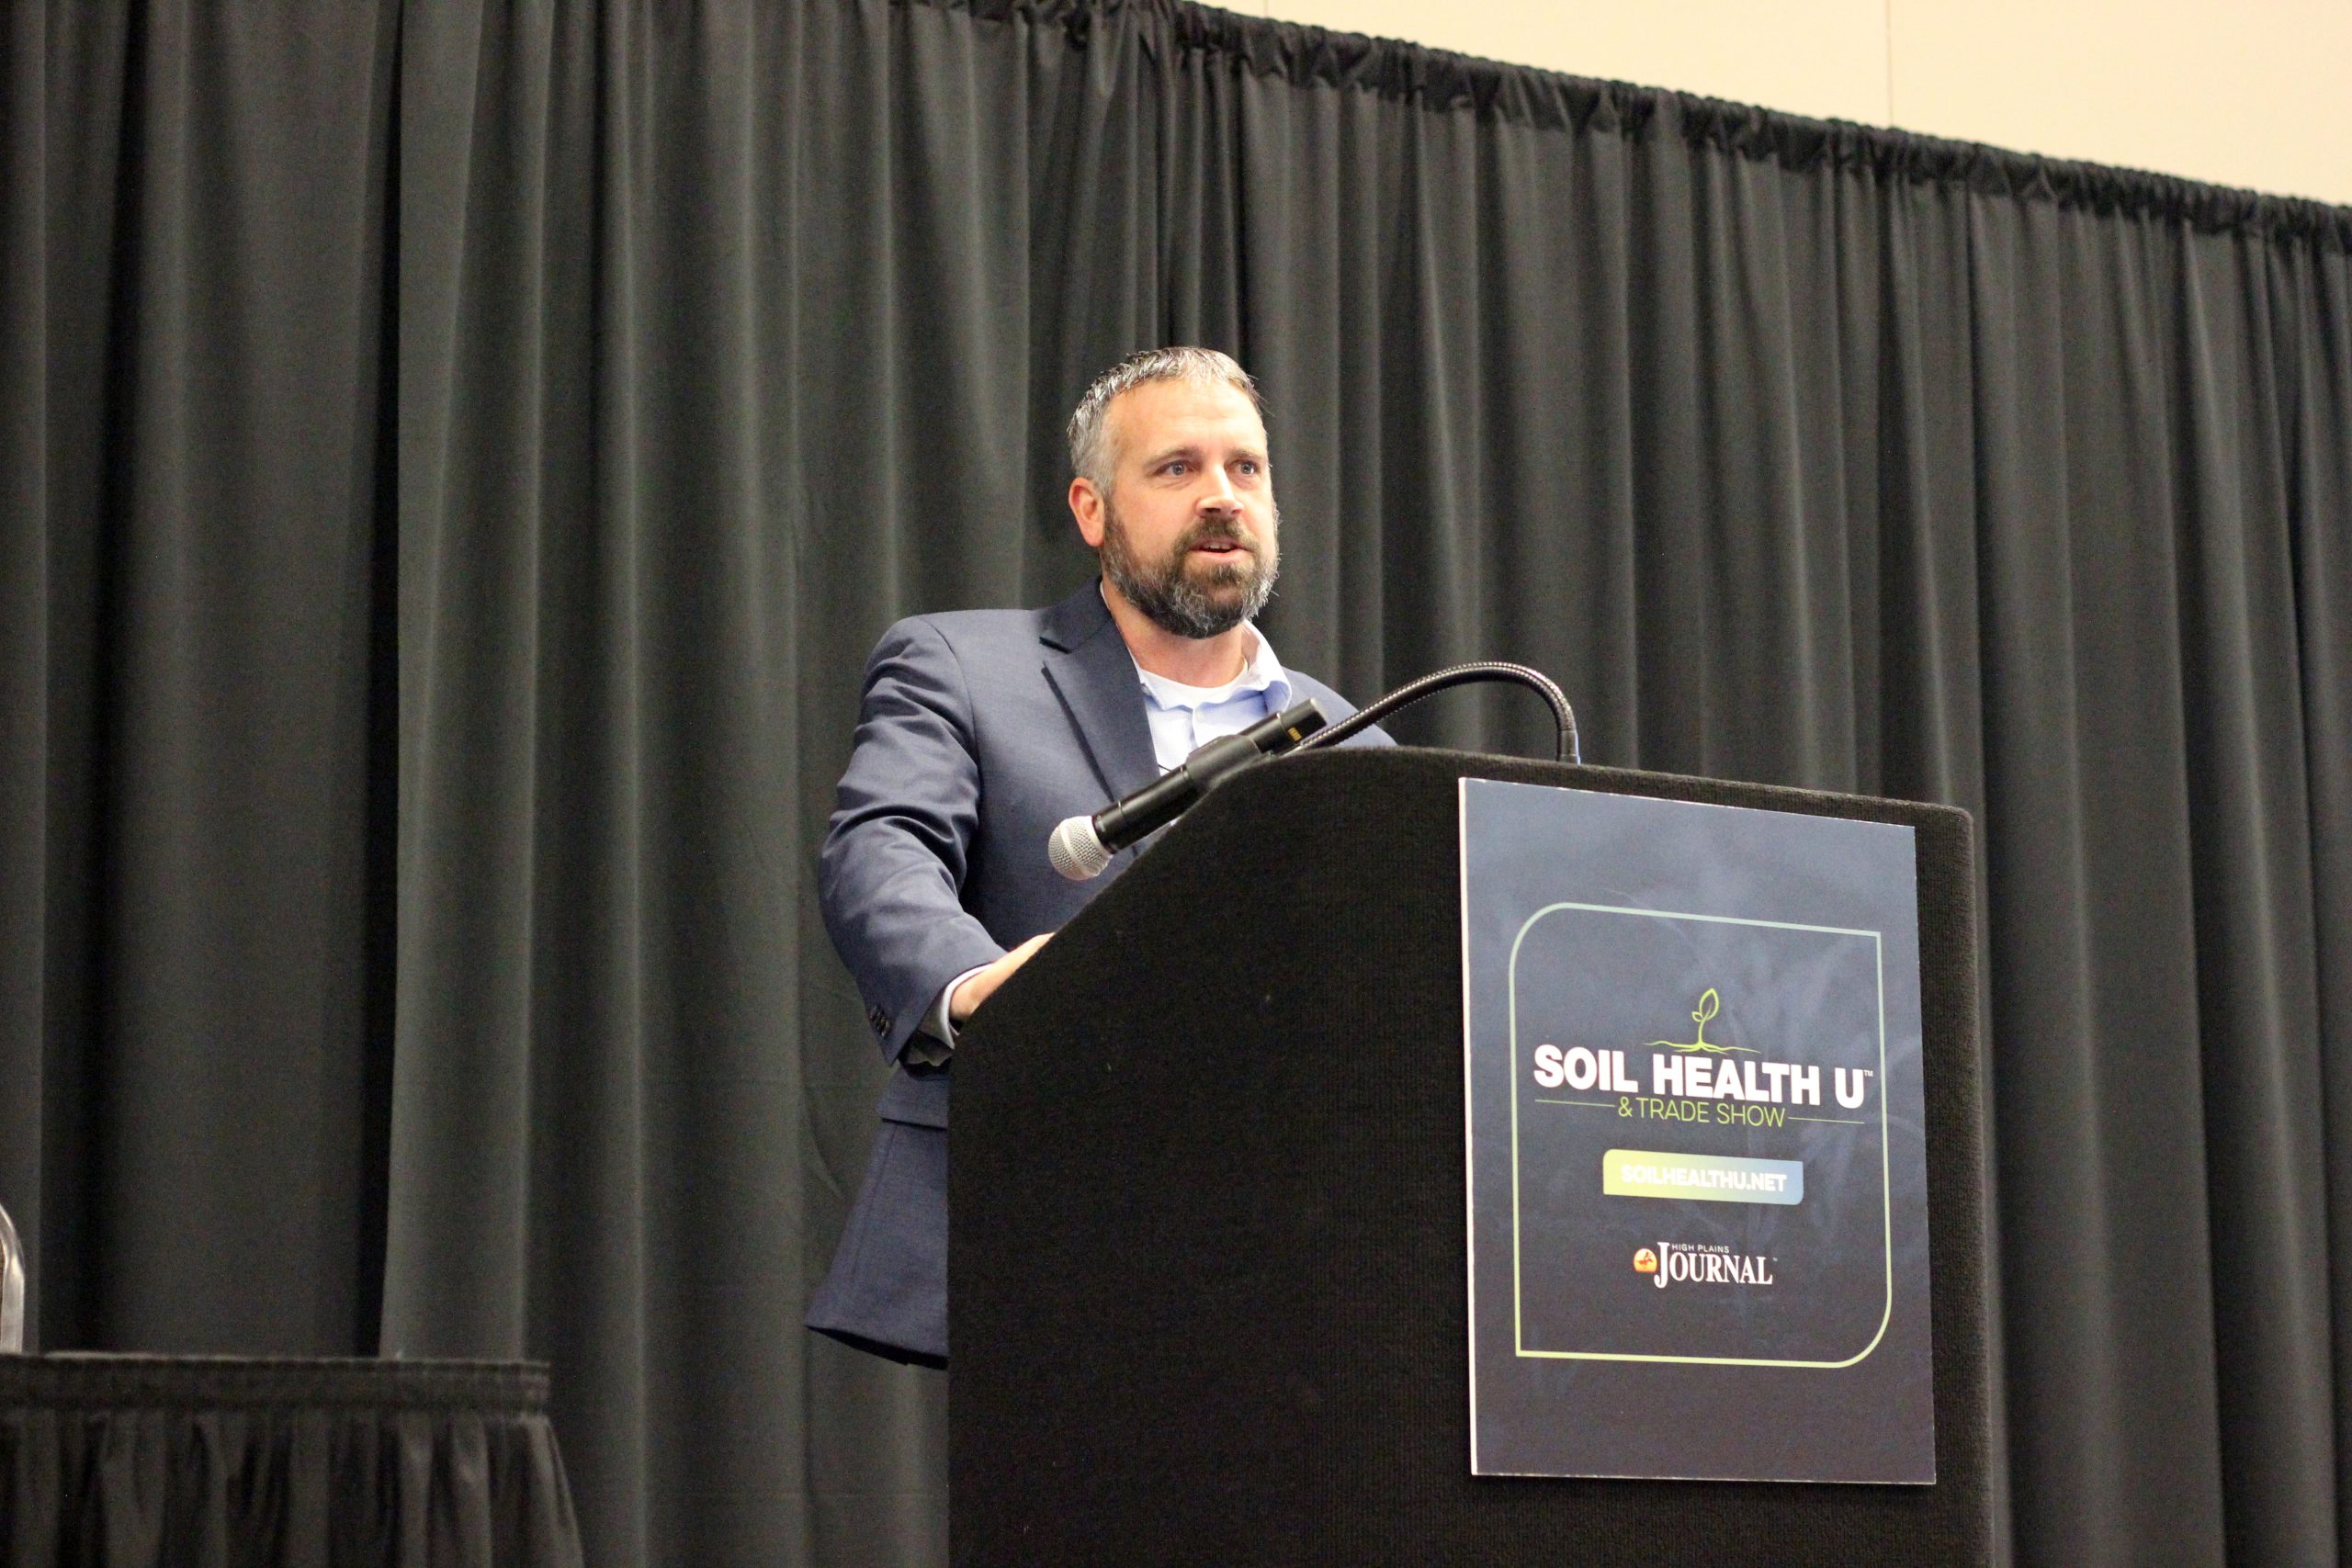 Joshua Gaskamp, consultation manager at Noble Research Institute, spoke about grazing for soil health at the recent Soil Health U event in Salina, Kansas. (Journal photo by Lacey Vilhauer.)